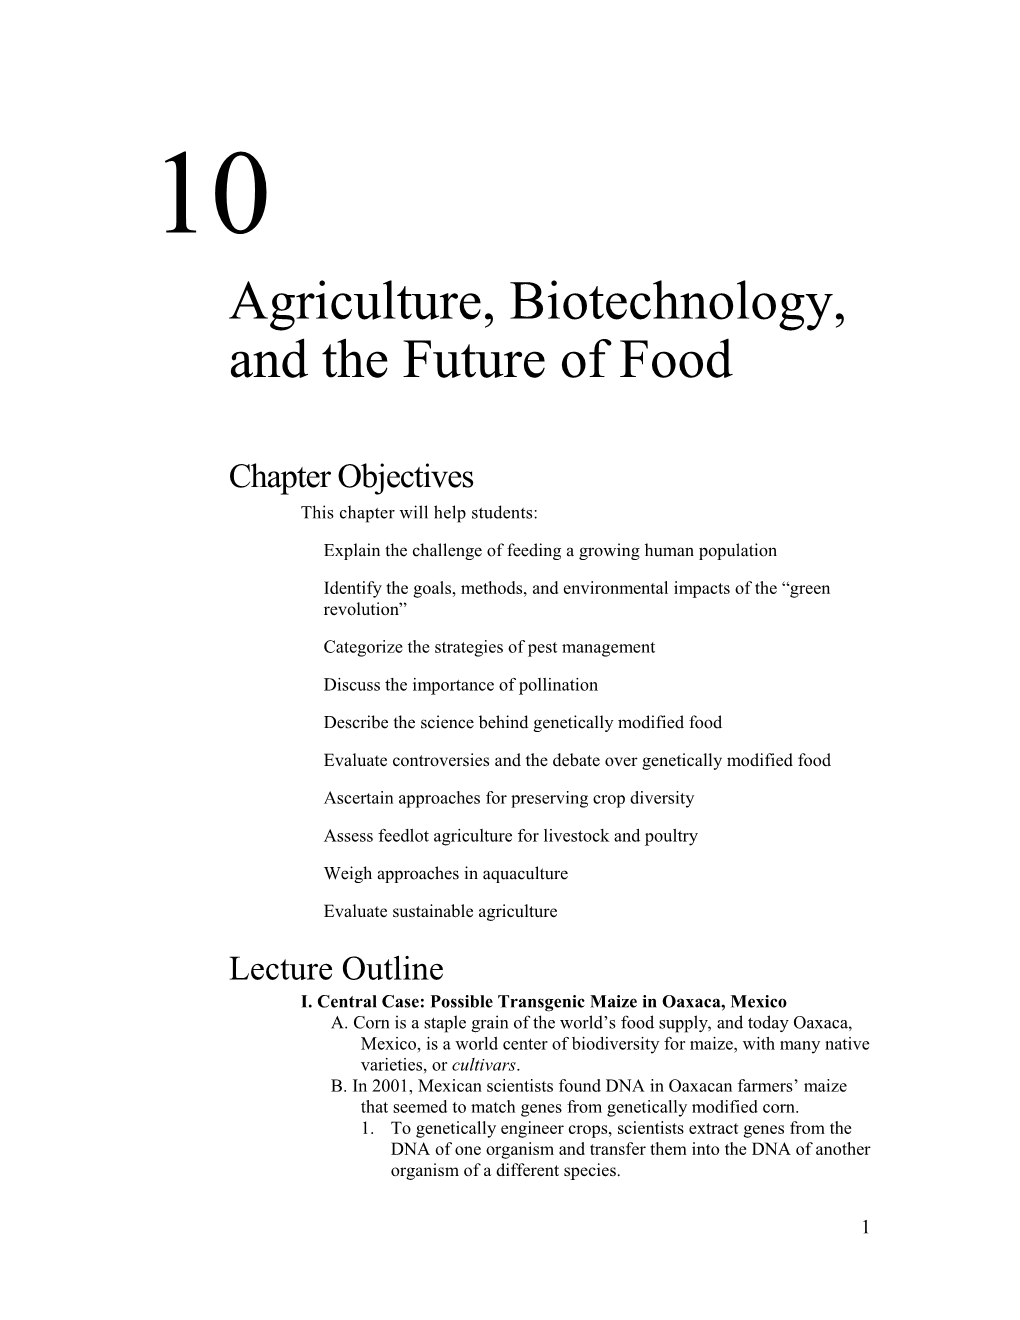 Agriculture, Biotechnology, and the Future of Food